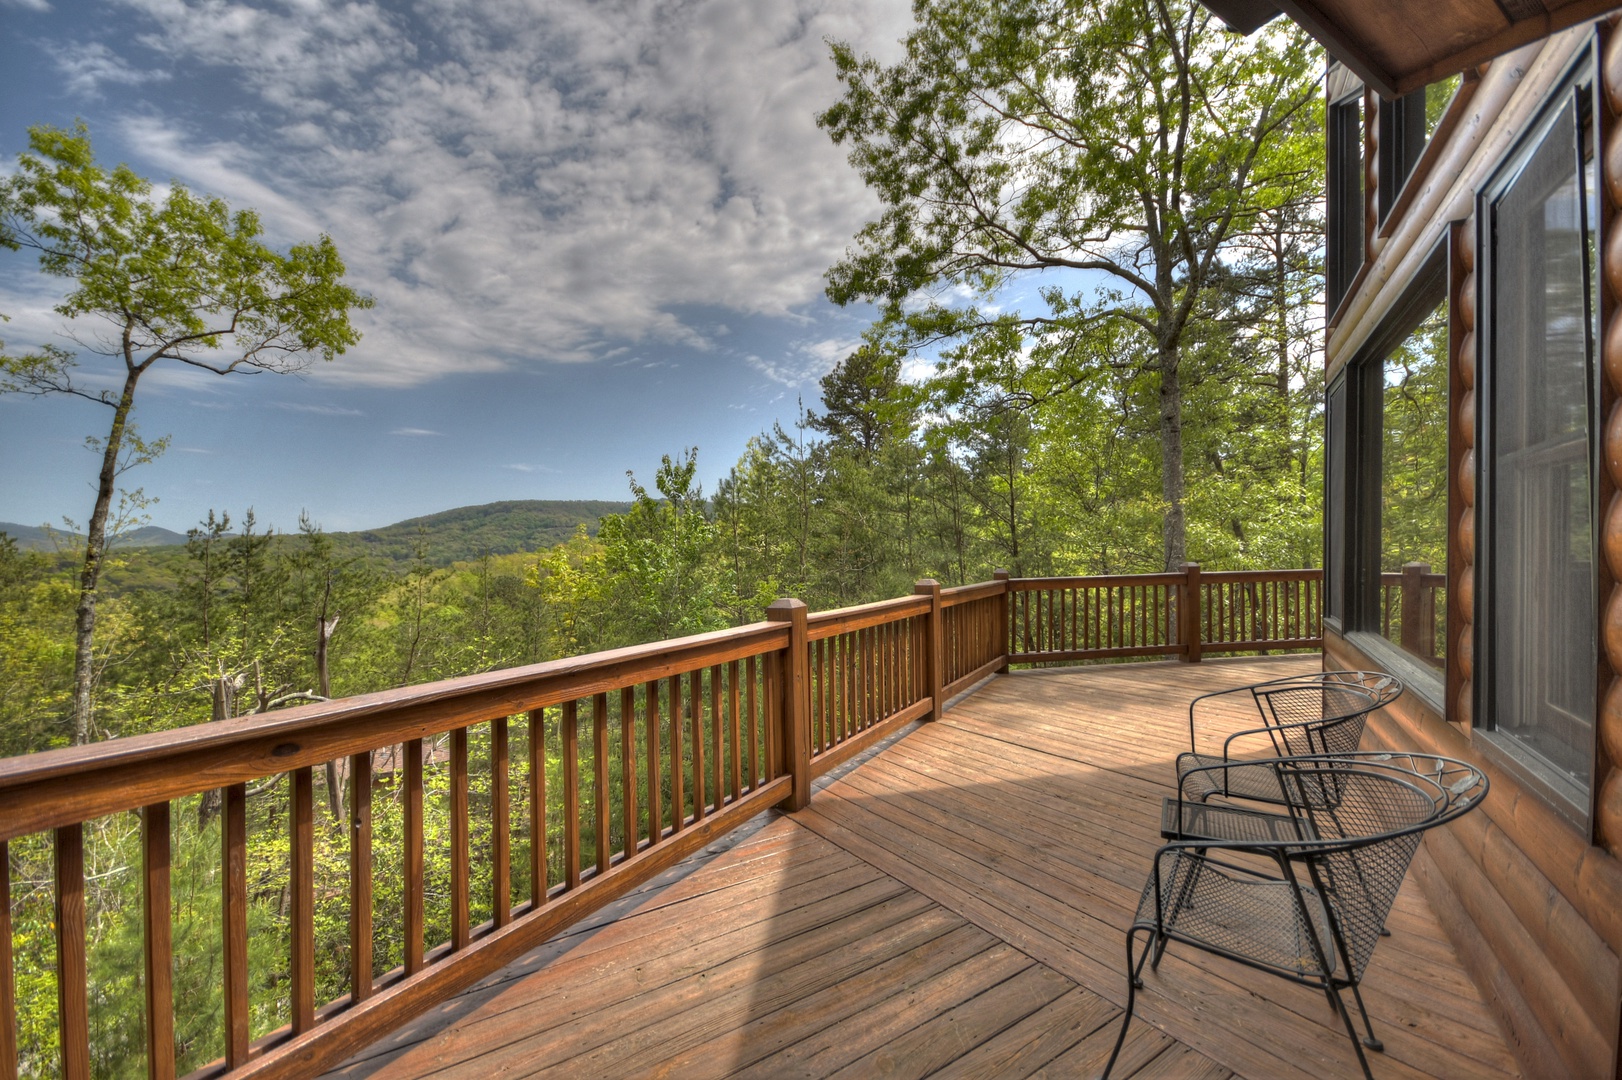 Aska Lodge- Deck view with outdoor seating and view of the Blue Ridge mountains